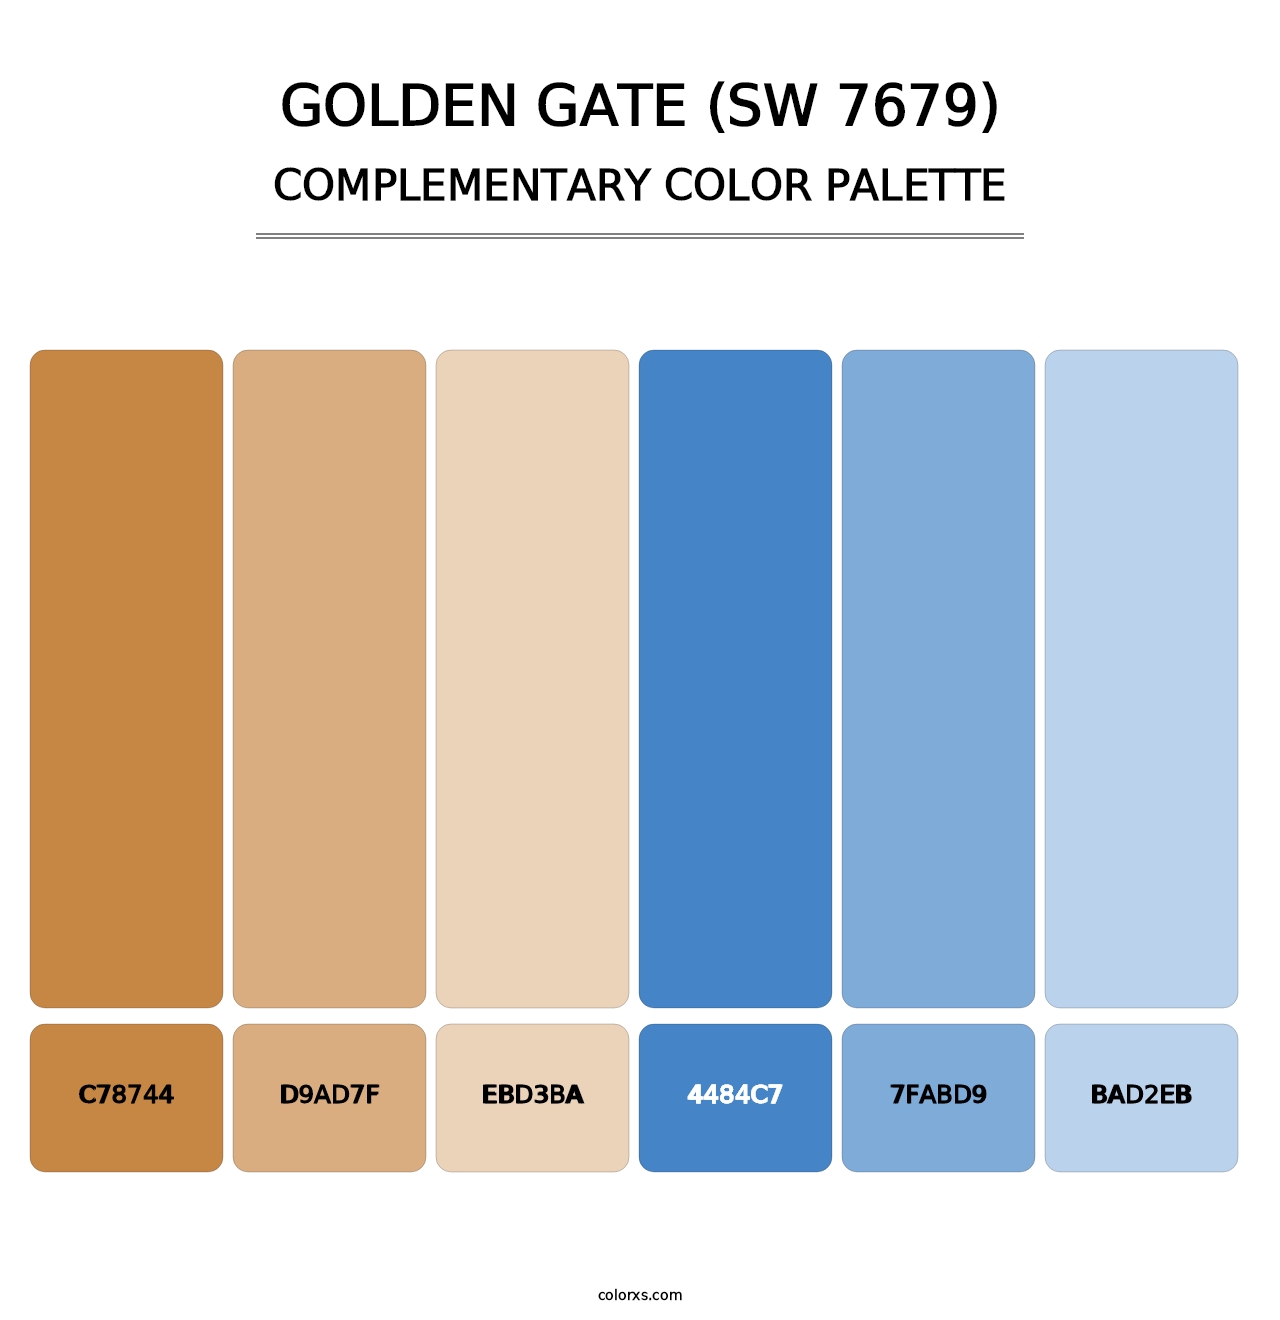 Golden Gate (SW 7679) - Complementary Color Palette